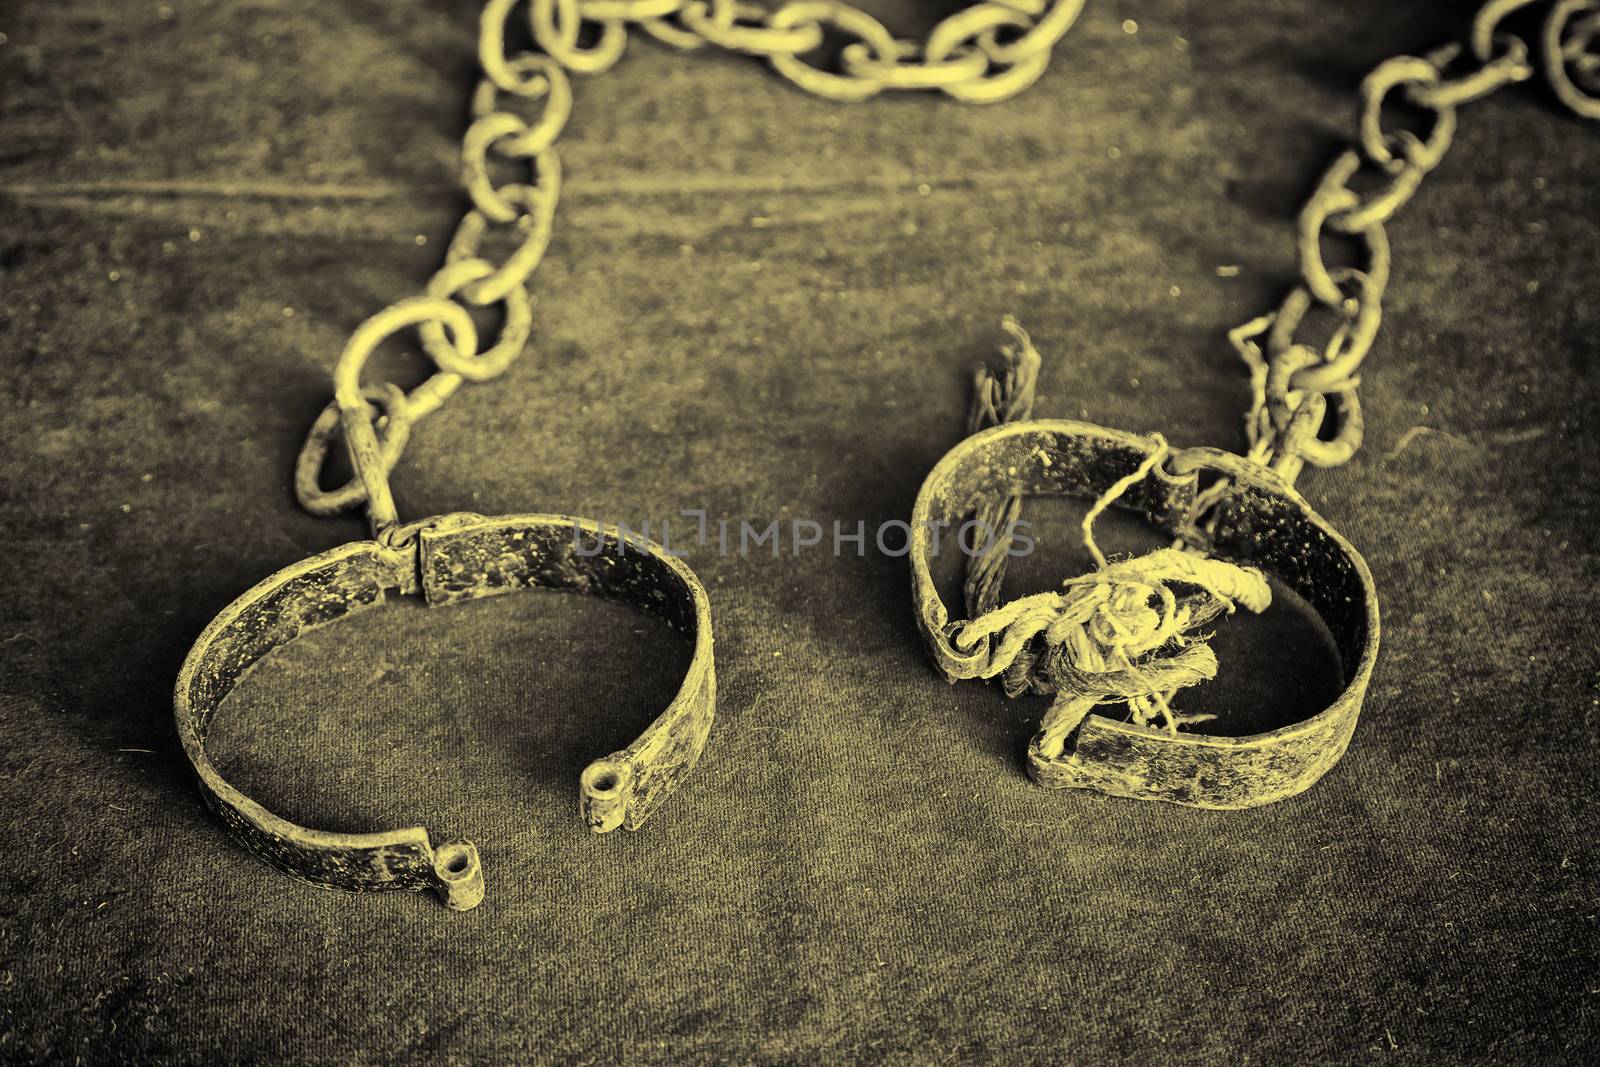 Ancient medieval handcuffs, detail of a former torture tool,